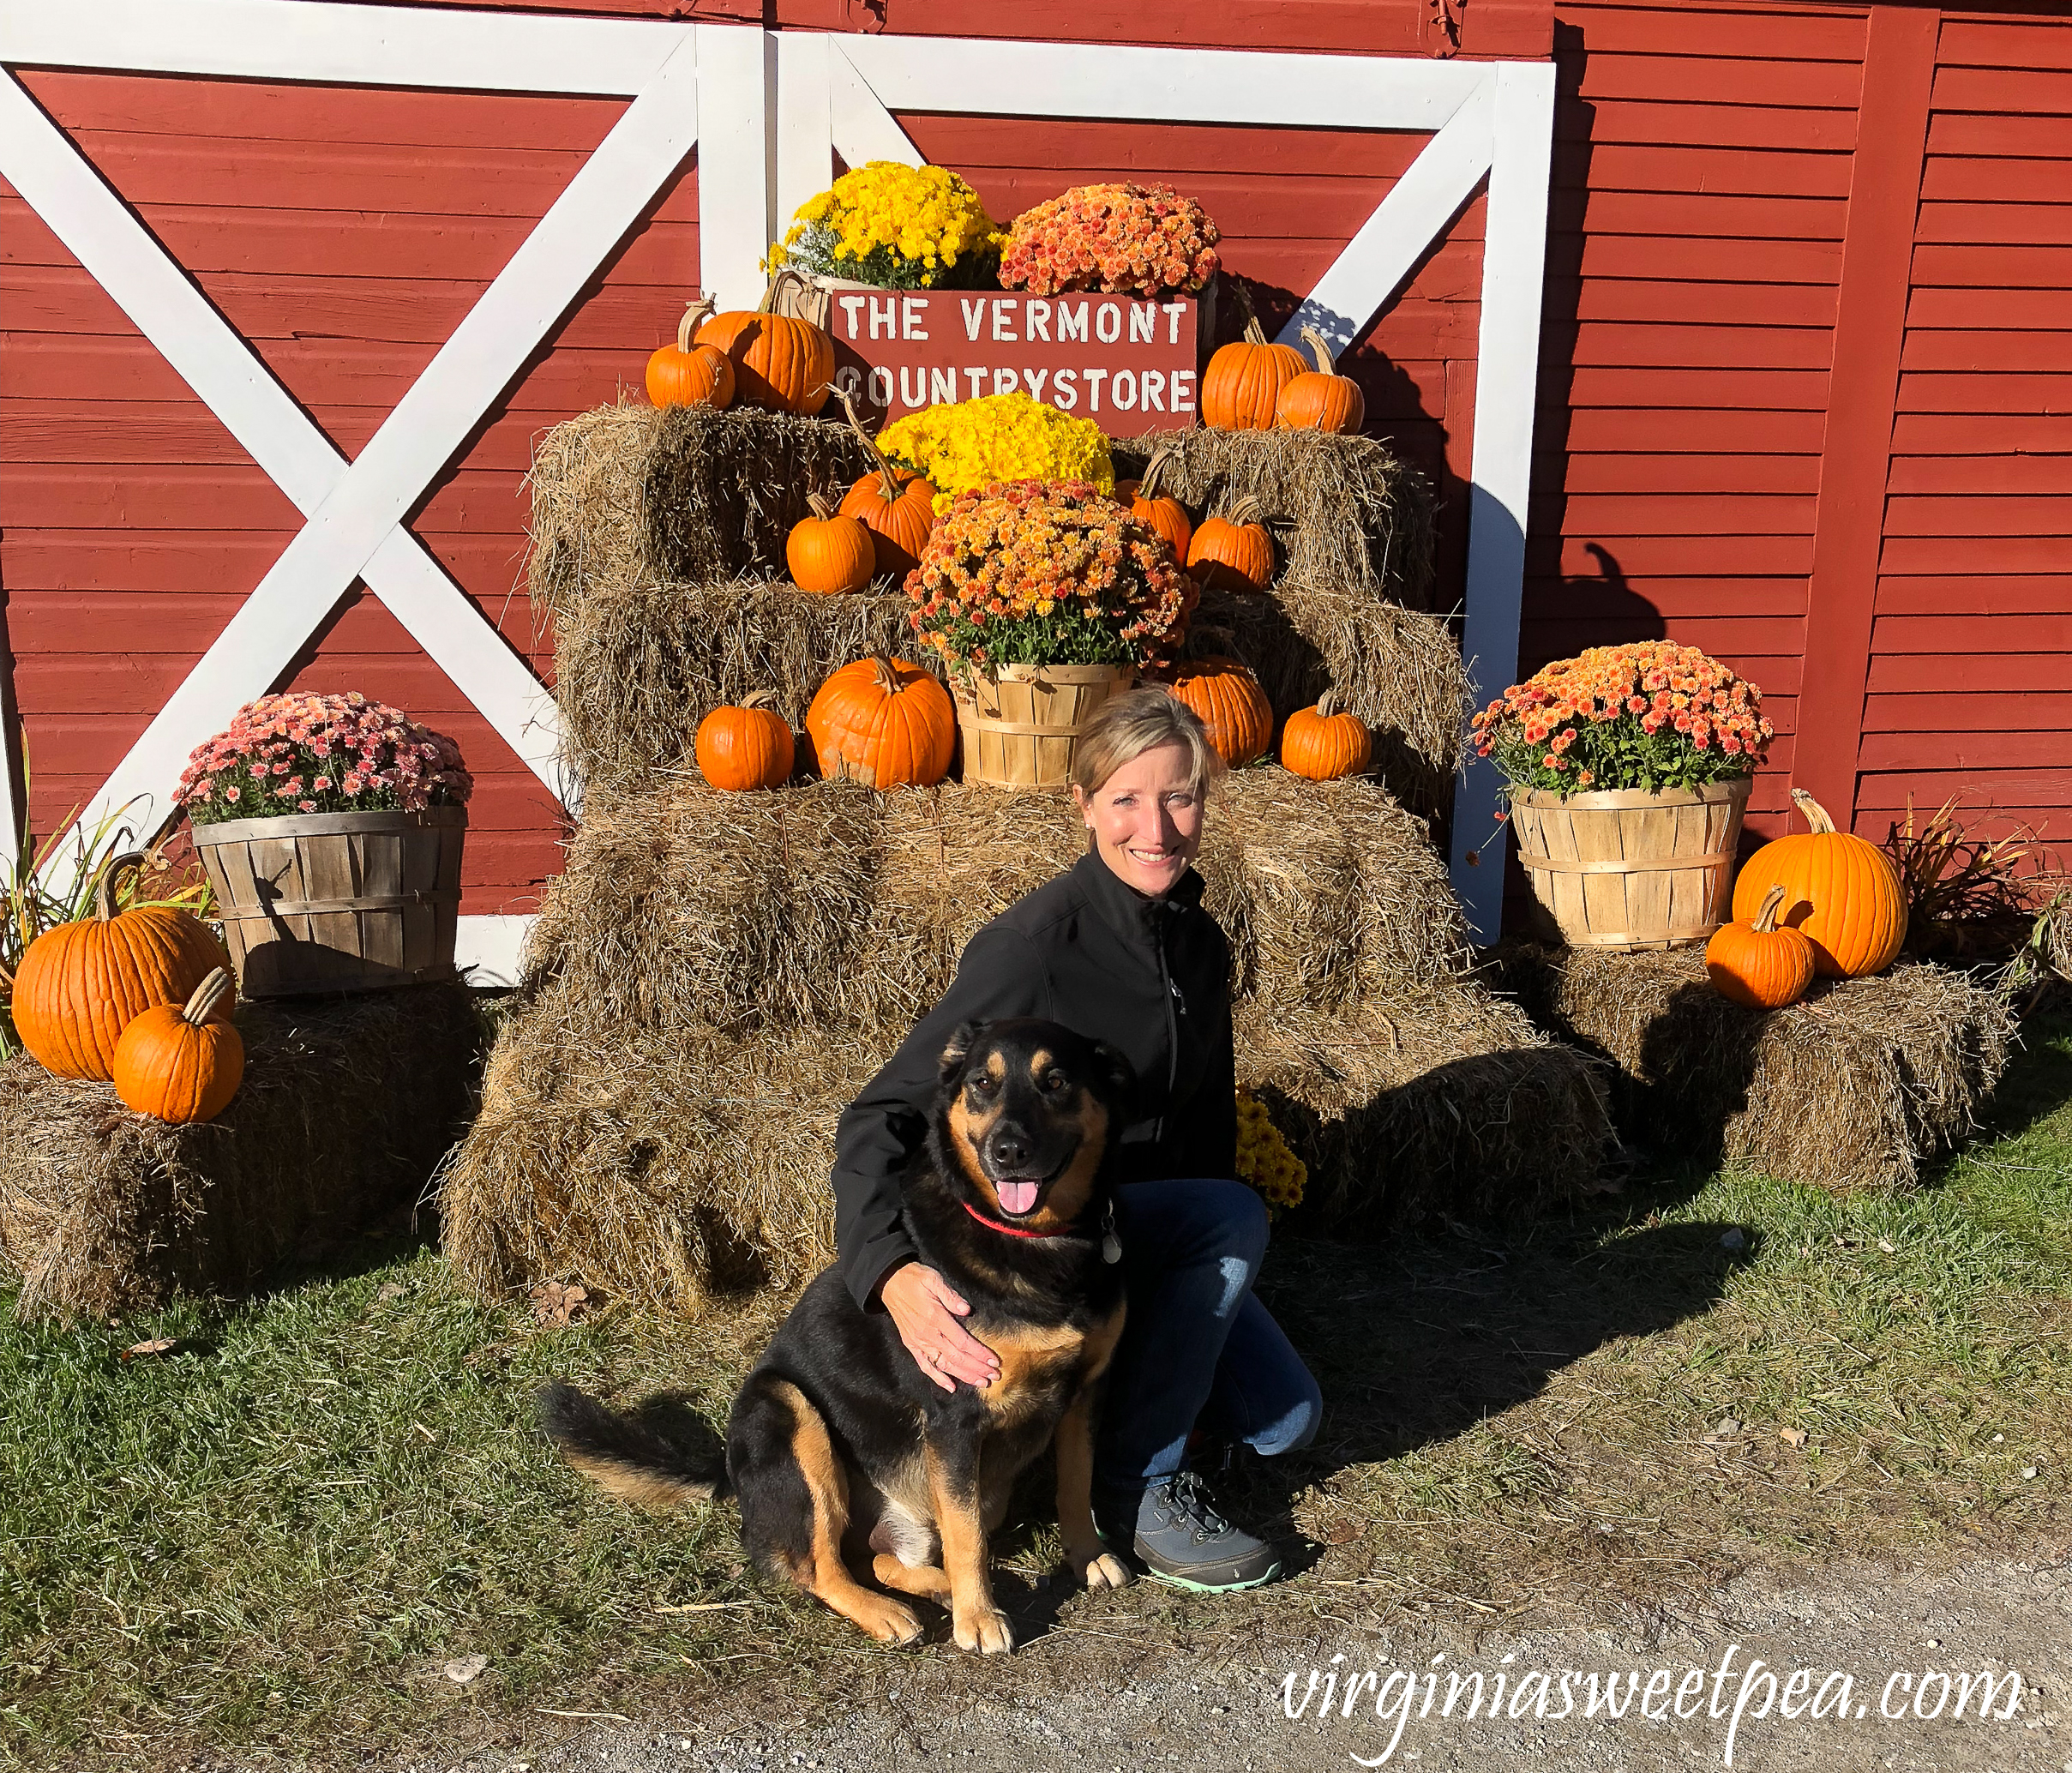 Visiting The Vermont Country Store #vermont #thevermontcountrystore #fall #fallinvermont